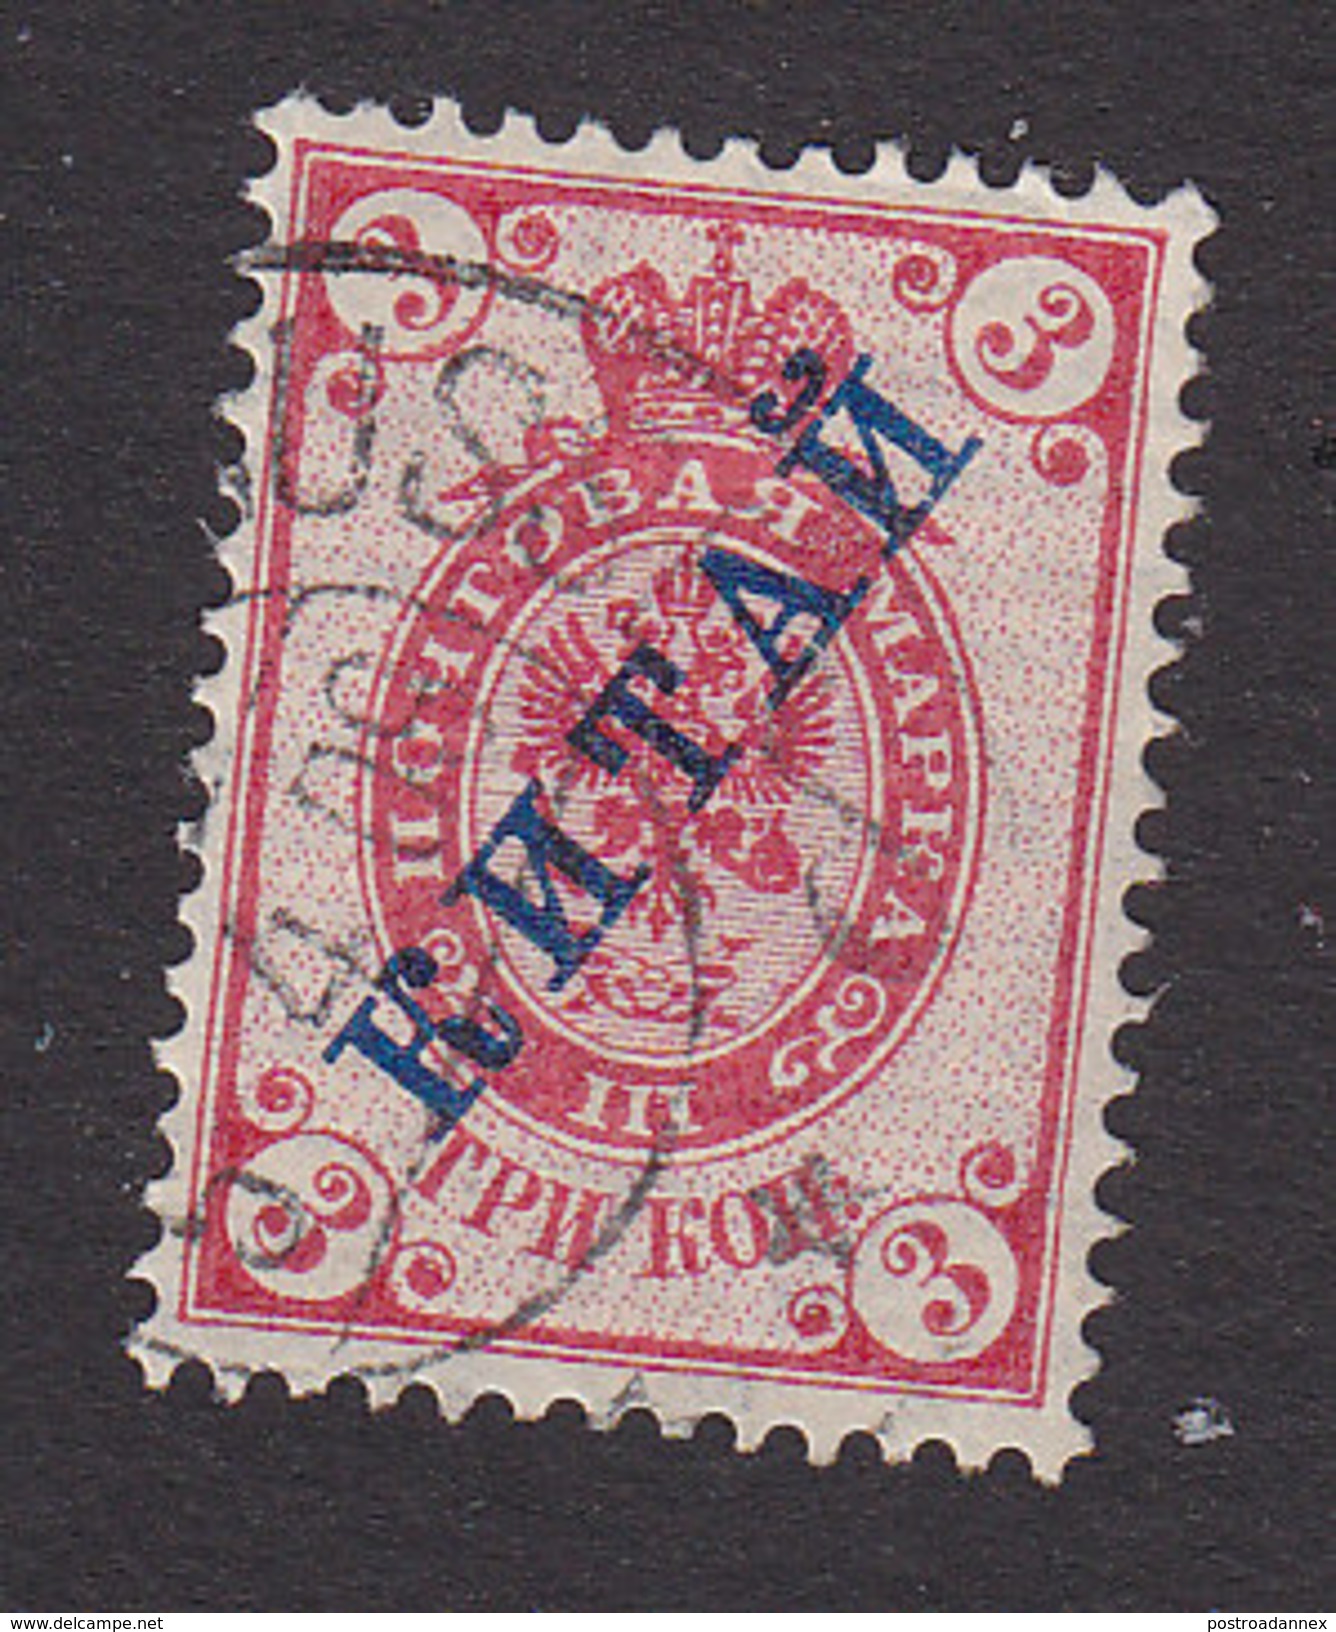 Russian Offices In China, Scott #3, Used, Arms Overprinted, Issued 1899 - China